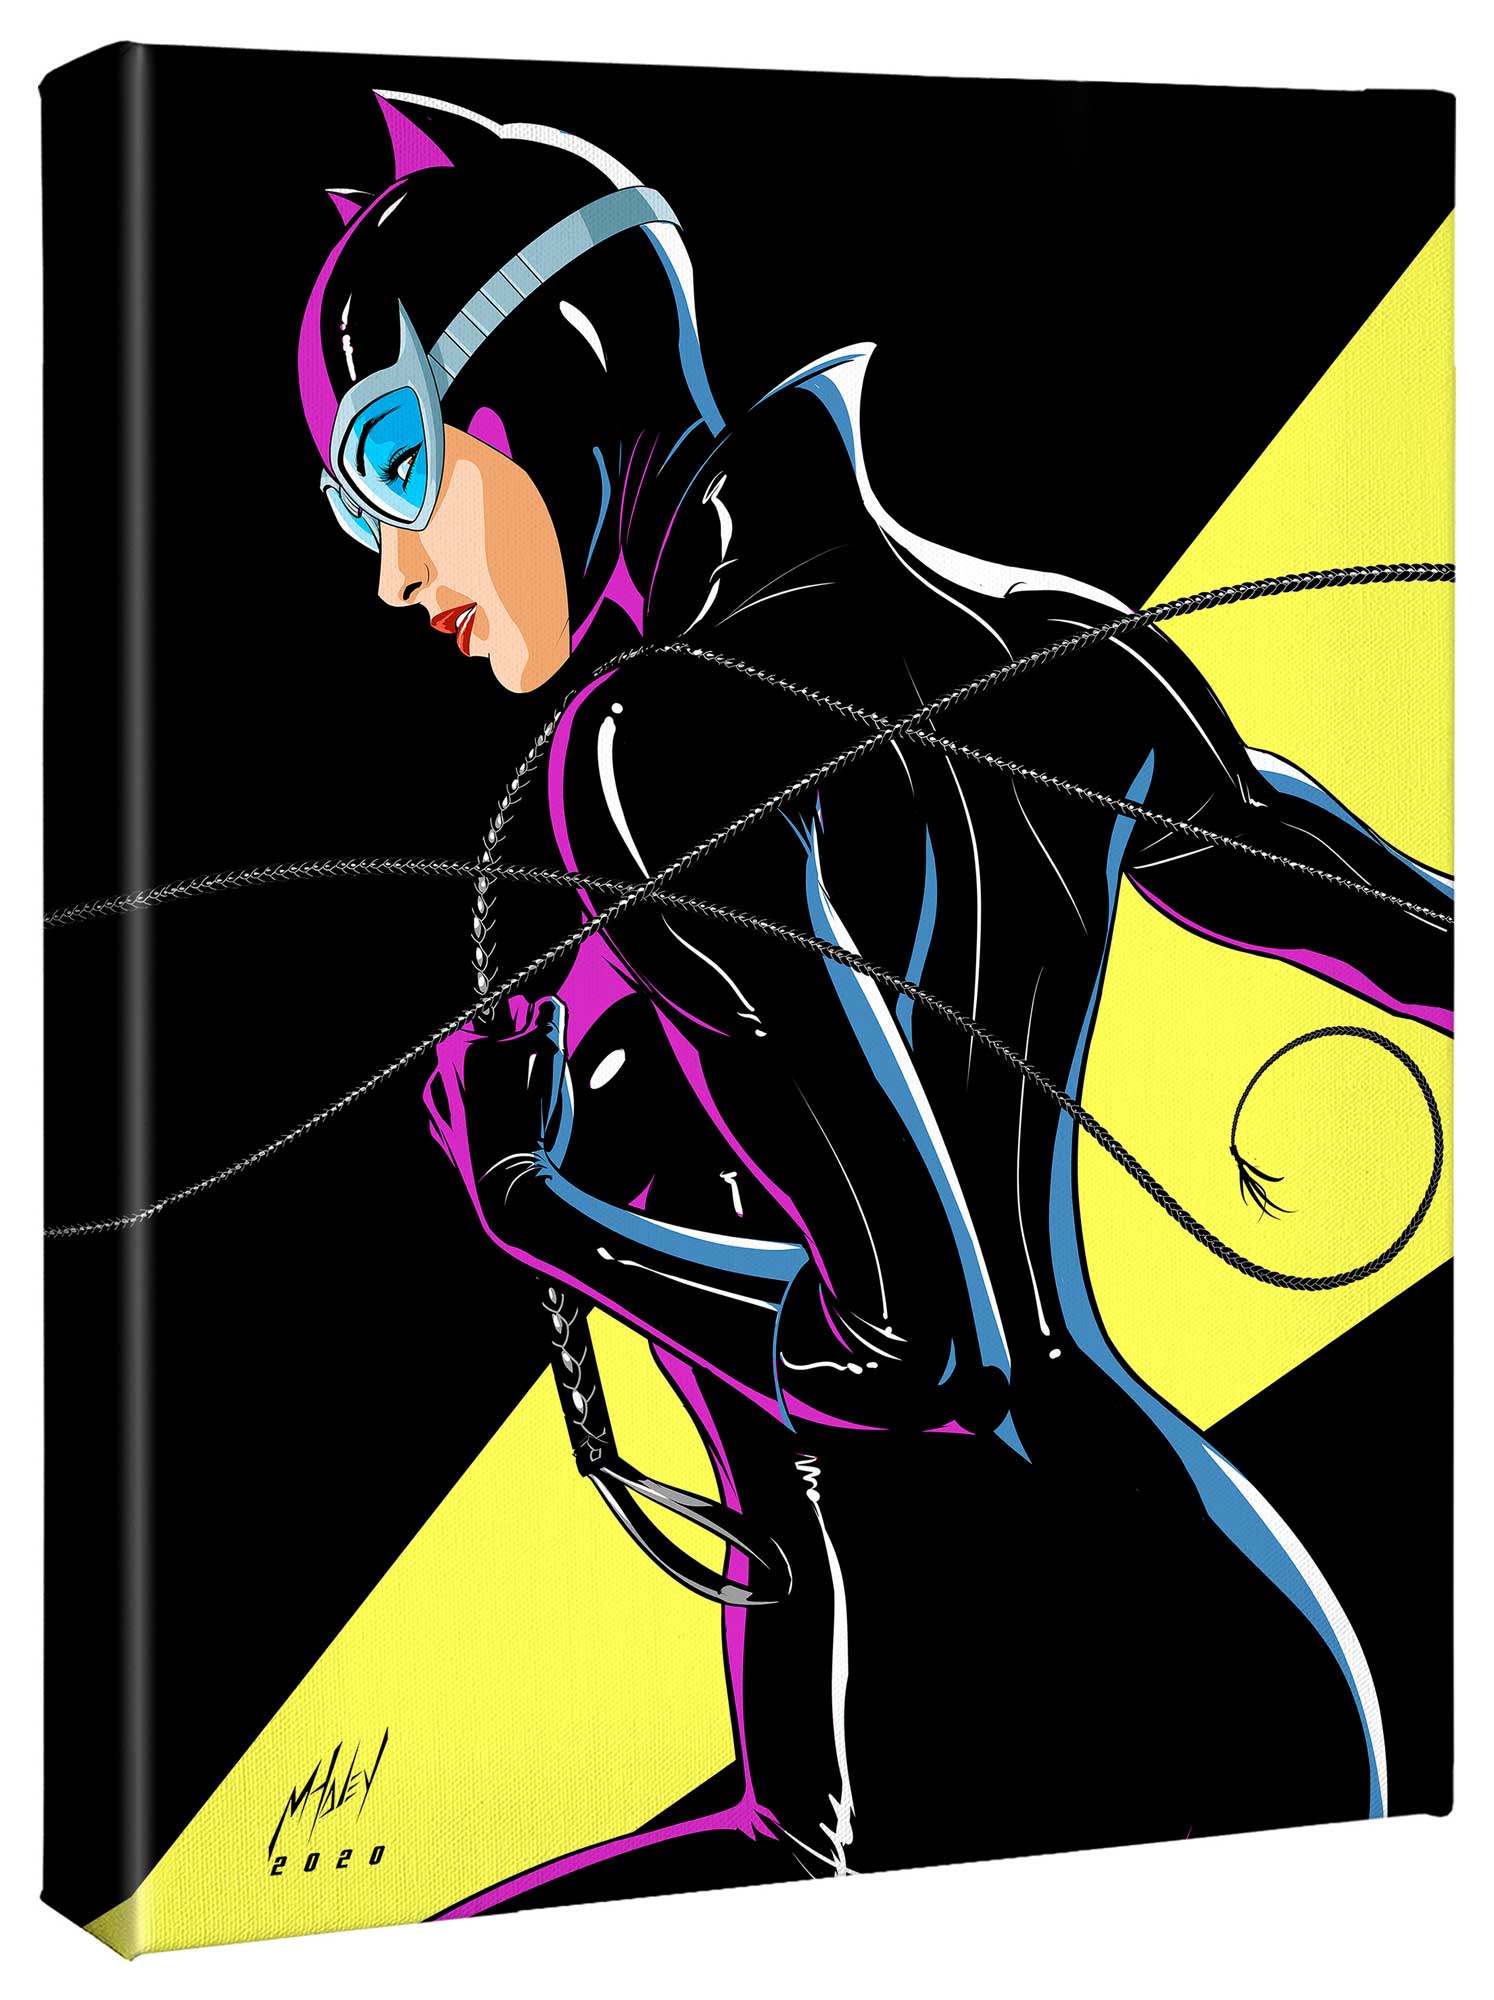 The ambiguous cat burglar Catwoman dressed in her black leather attire. Gallery Wrapped Canvas